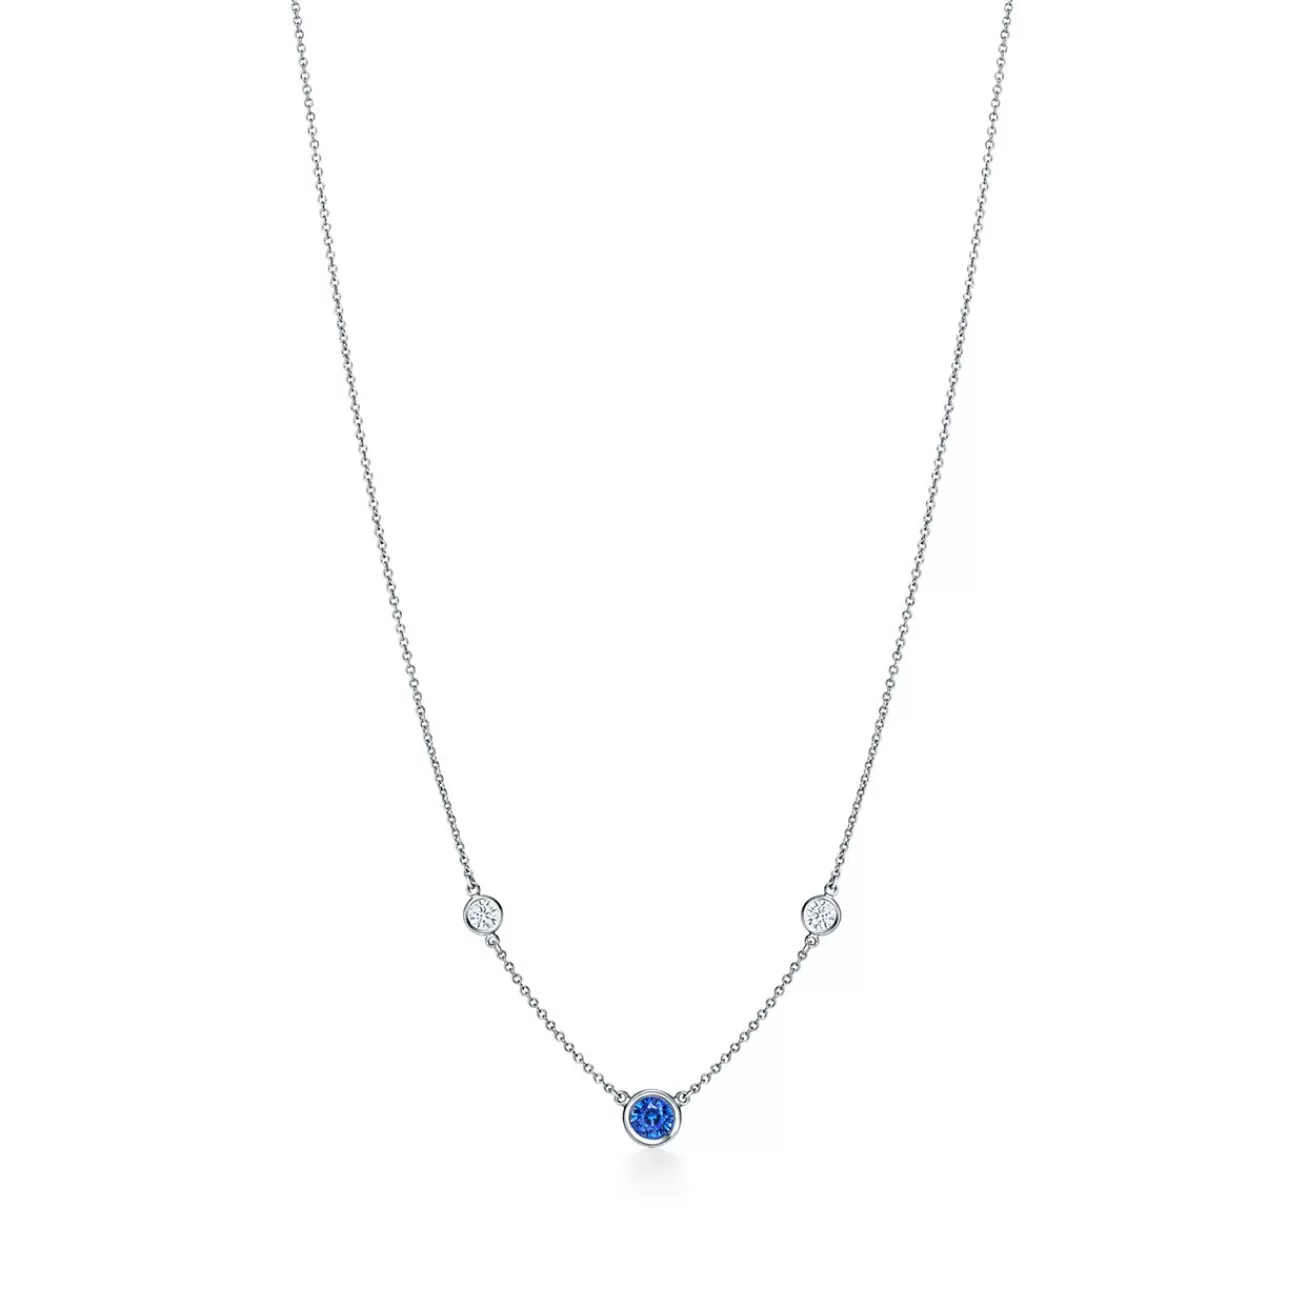 Tiffany & Co. Elsa Peretti® Color by the Yard necklace in platinum with sapphire and diamonds. | ^ Necklaces & Pendants | Platinum Jewelry